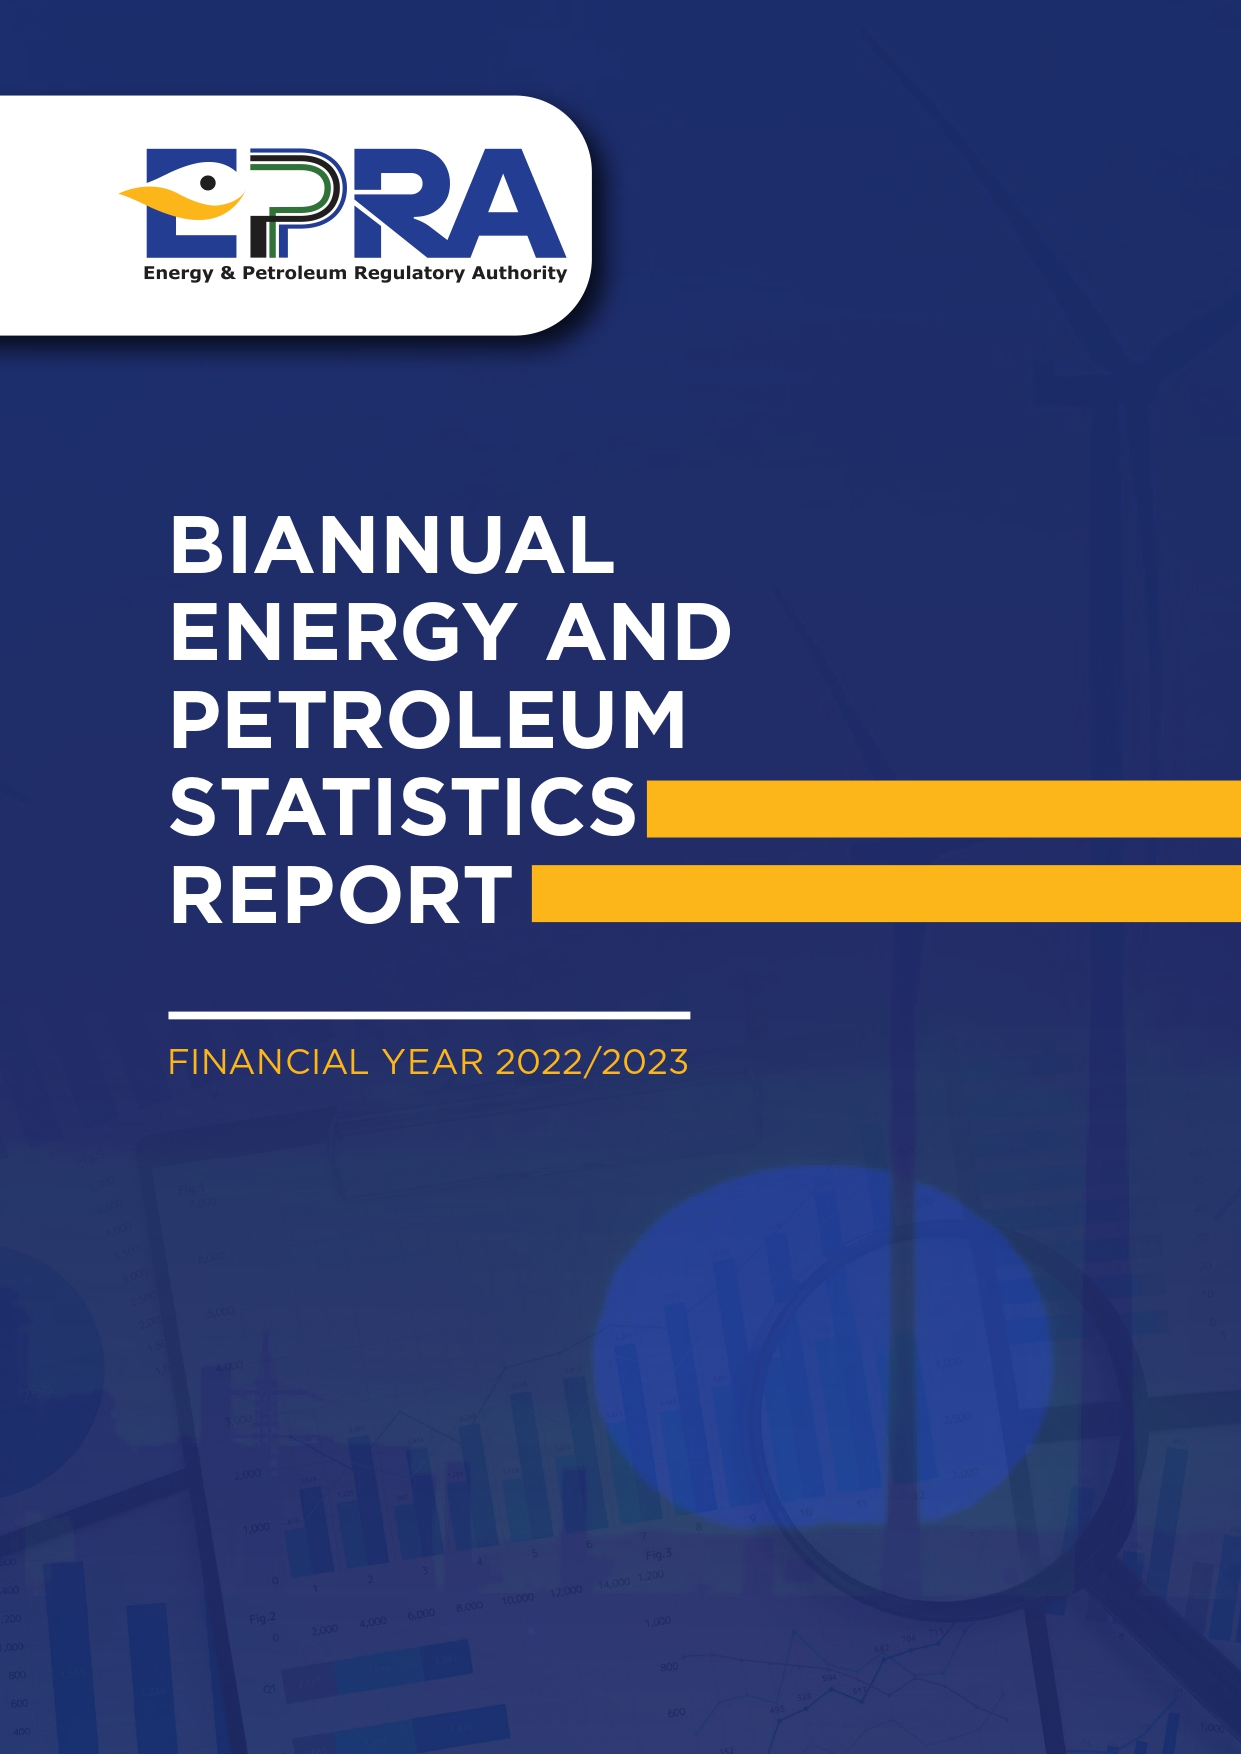 BIANNUAL  ENERGY AND  PETROLEUM  STATISTICS  REPORT FOR THE FINANCIAL YEAR 2022/2023